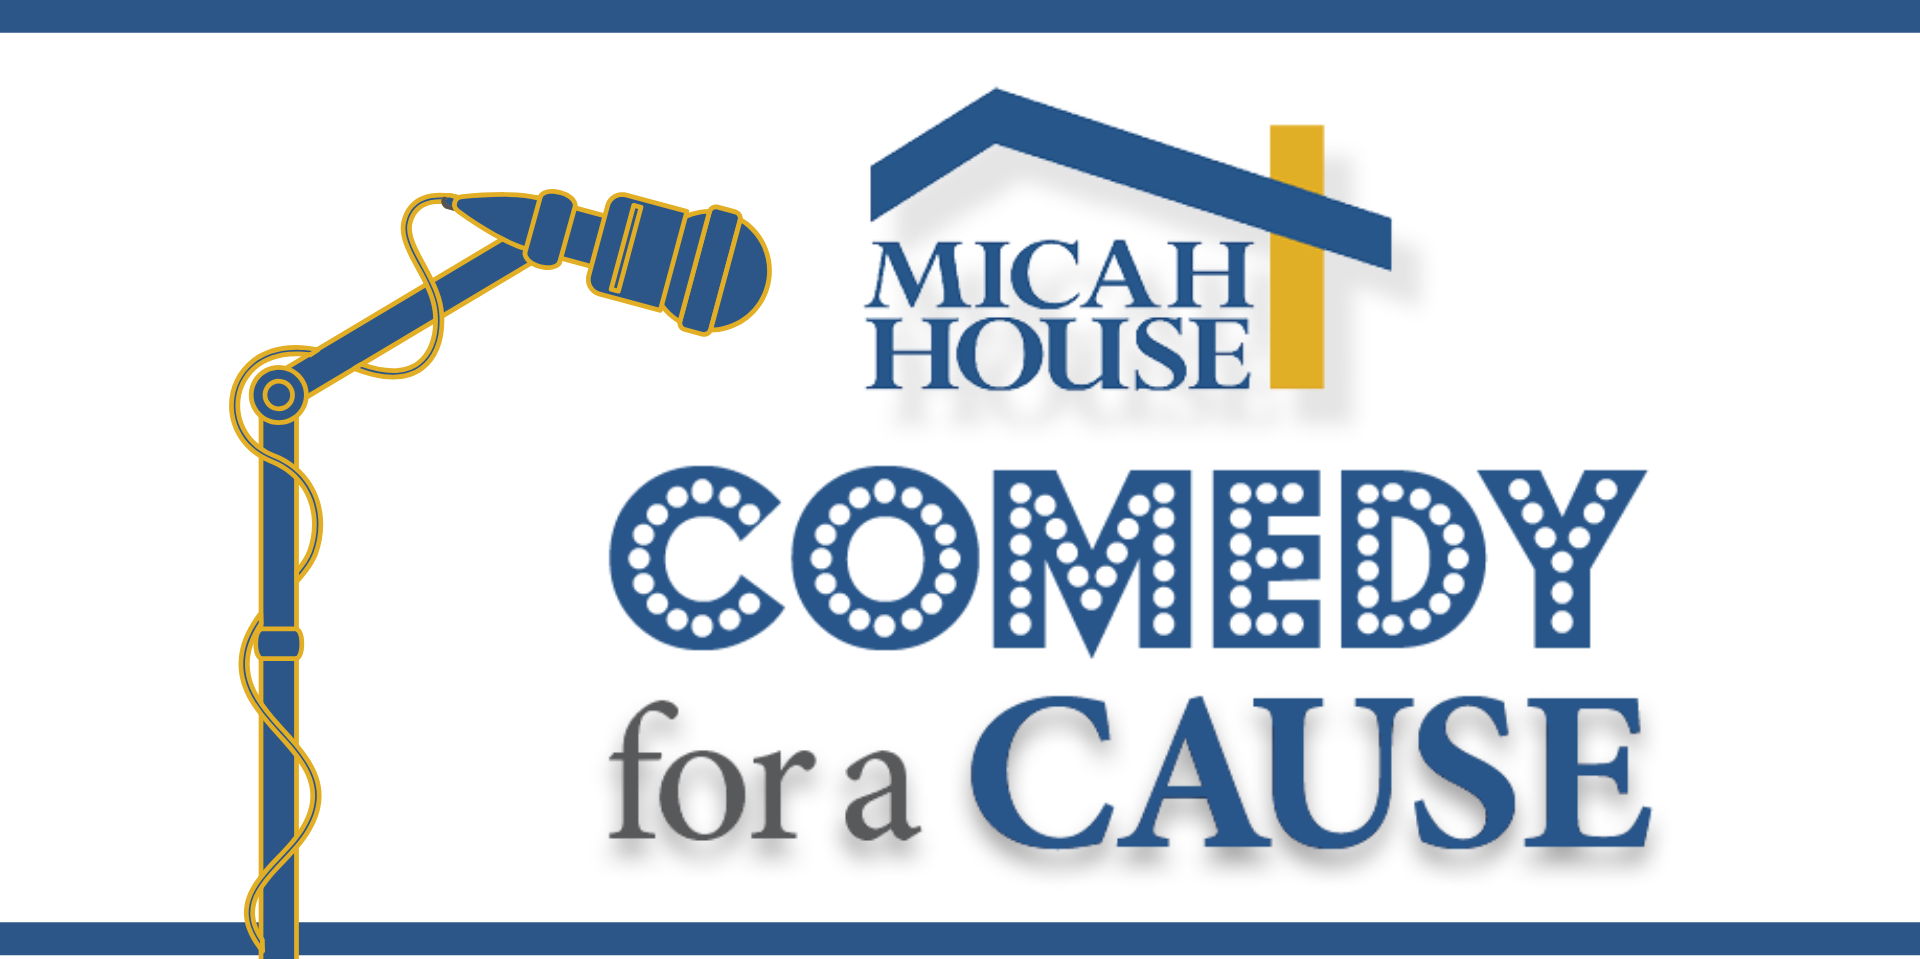 Comedy for a Cause promotional image